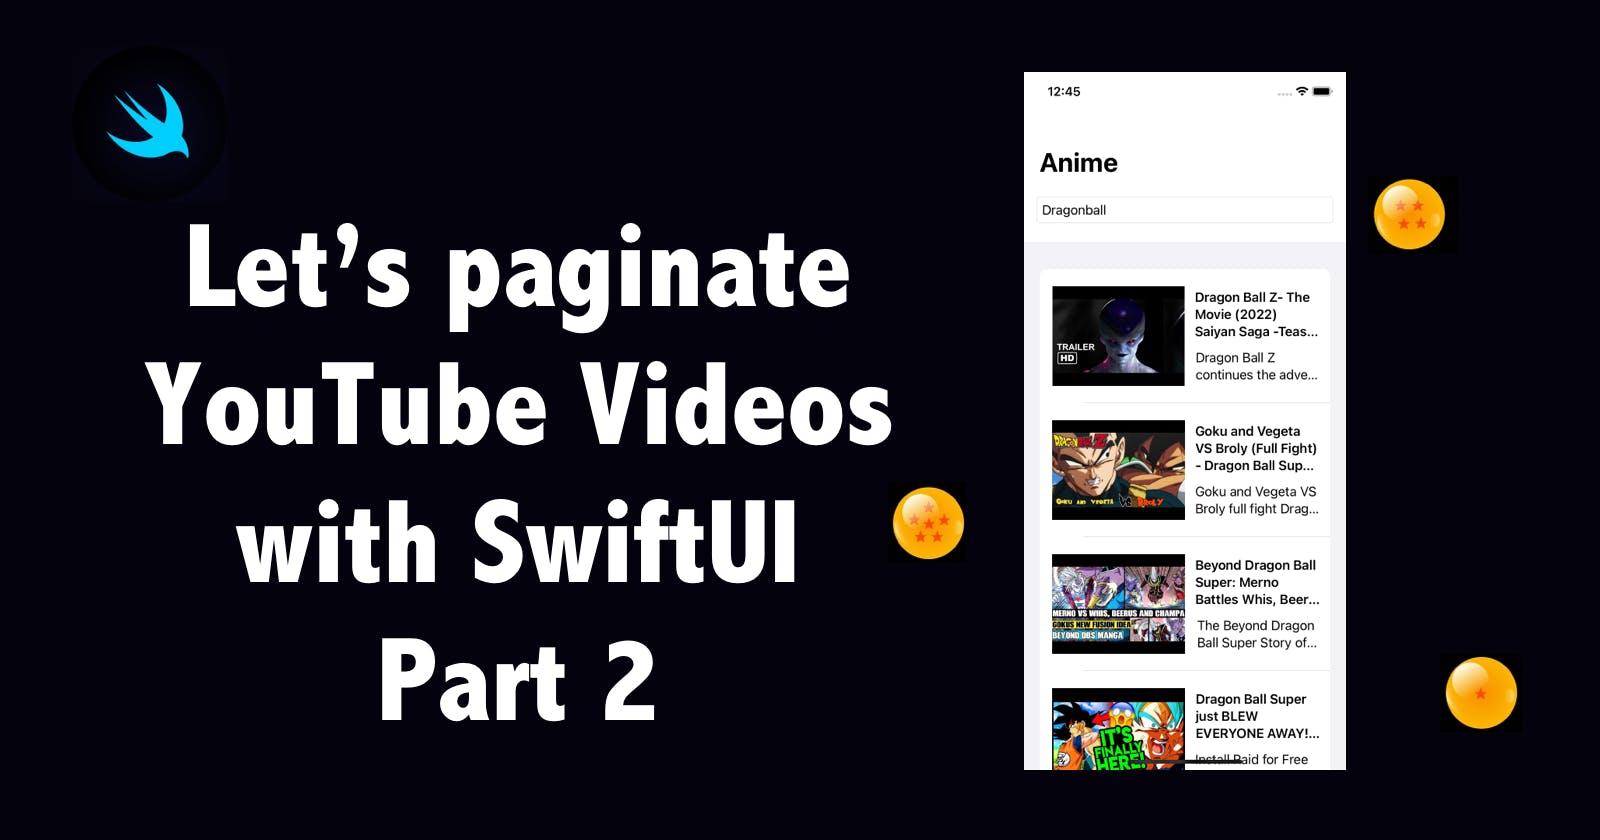 How to paginate YouTube Videos with SwiftUI (Part2)